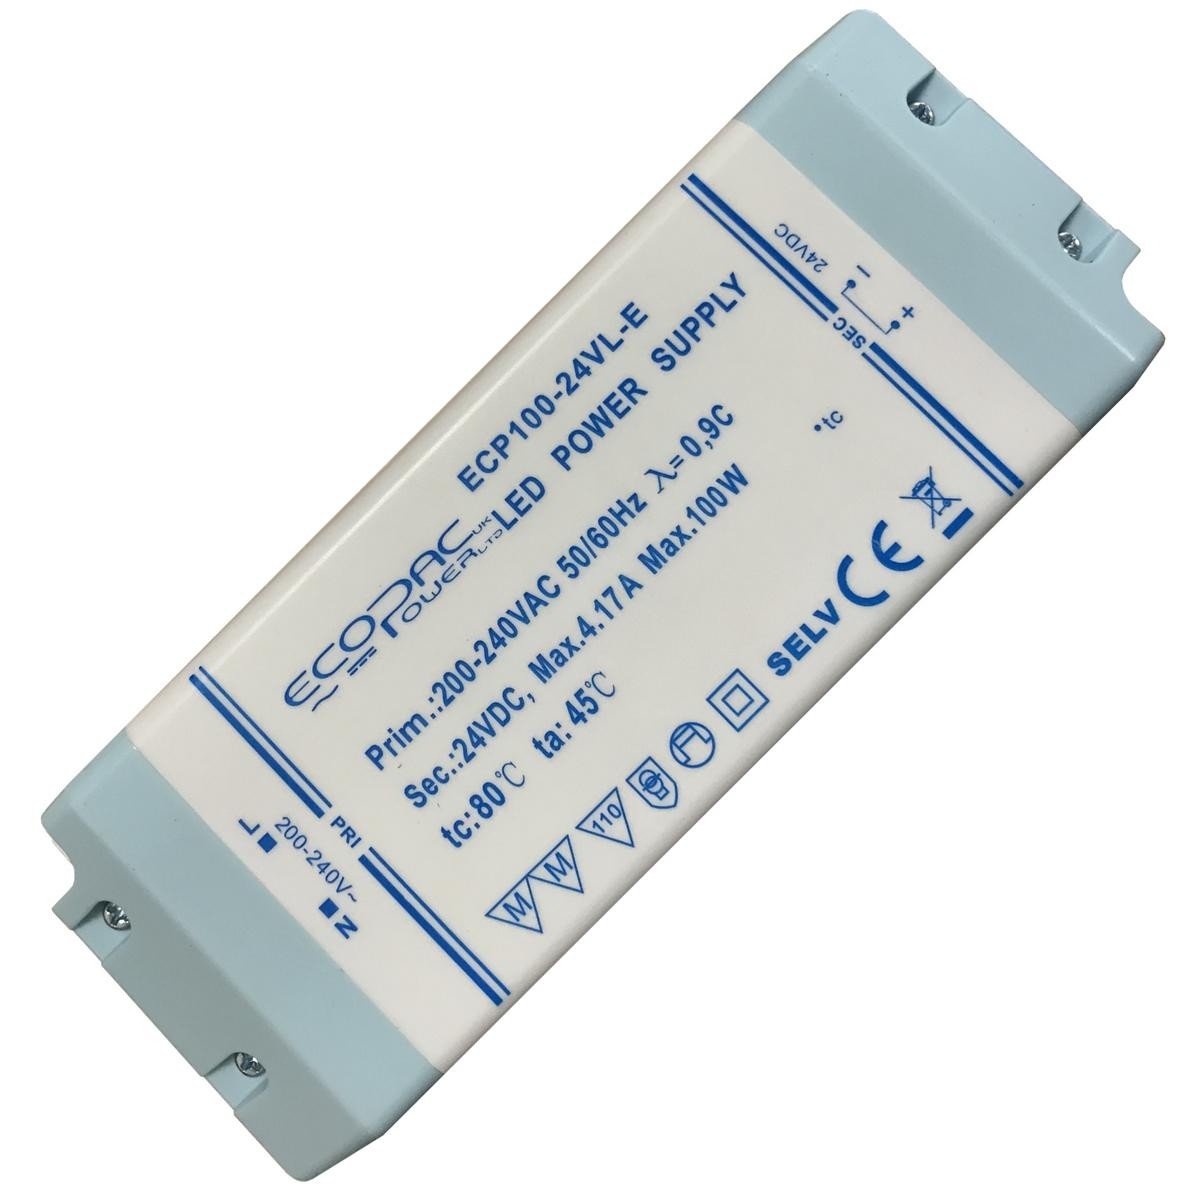 View 100w LED Driver information